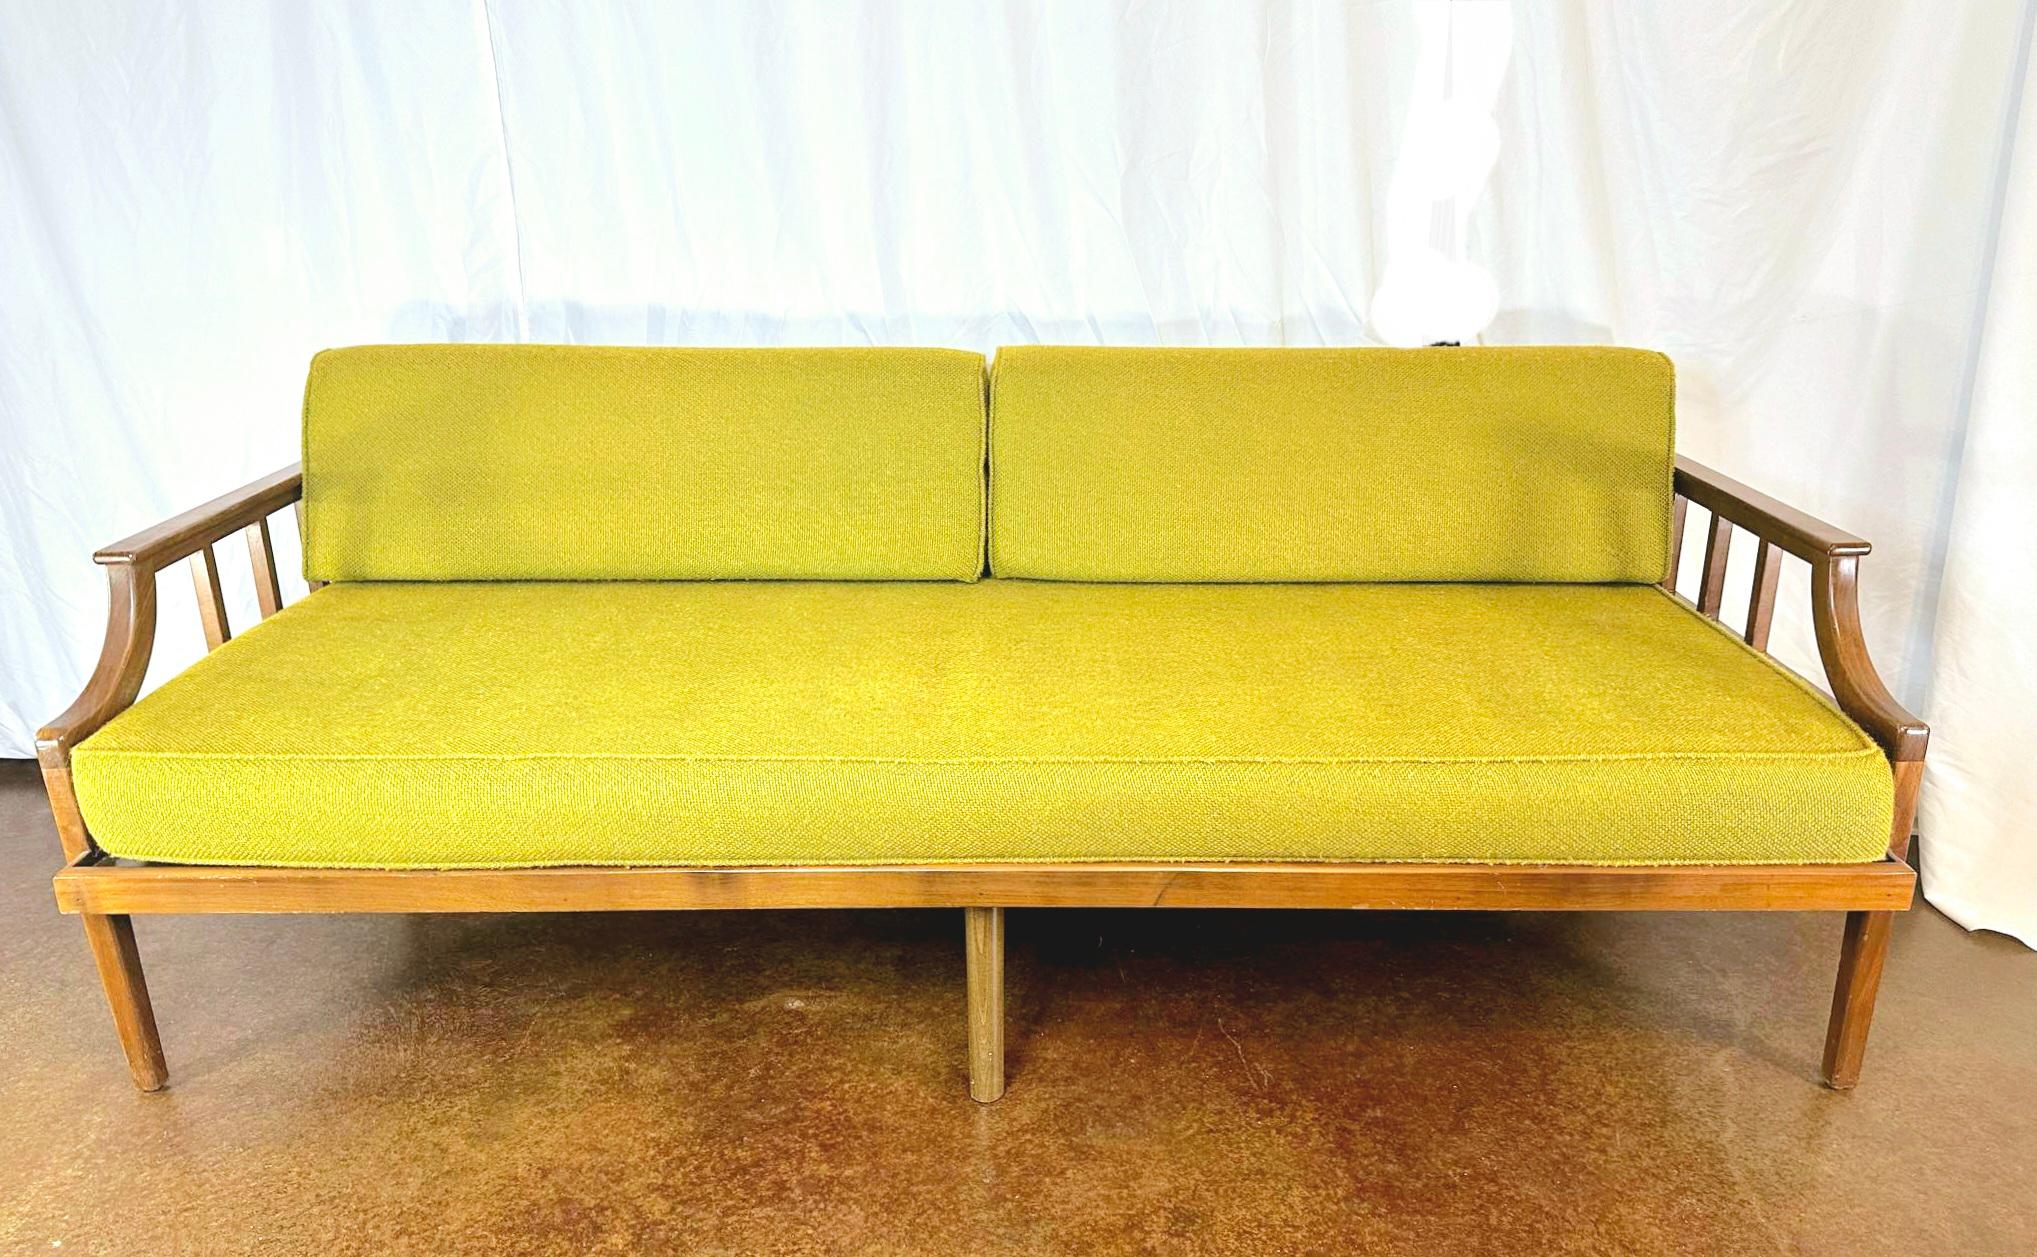 Upholstery 1966 Teak Green Sofa / Loveseat / Daybed For Sale